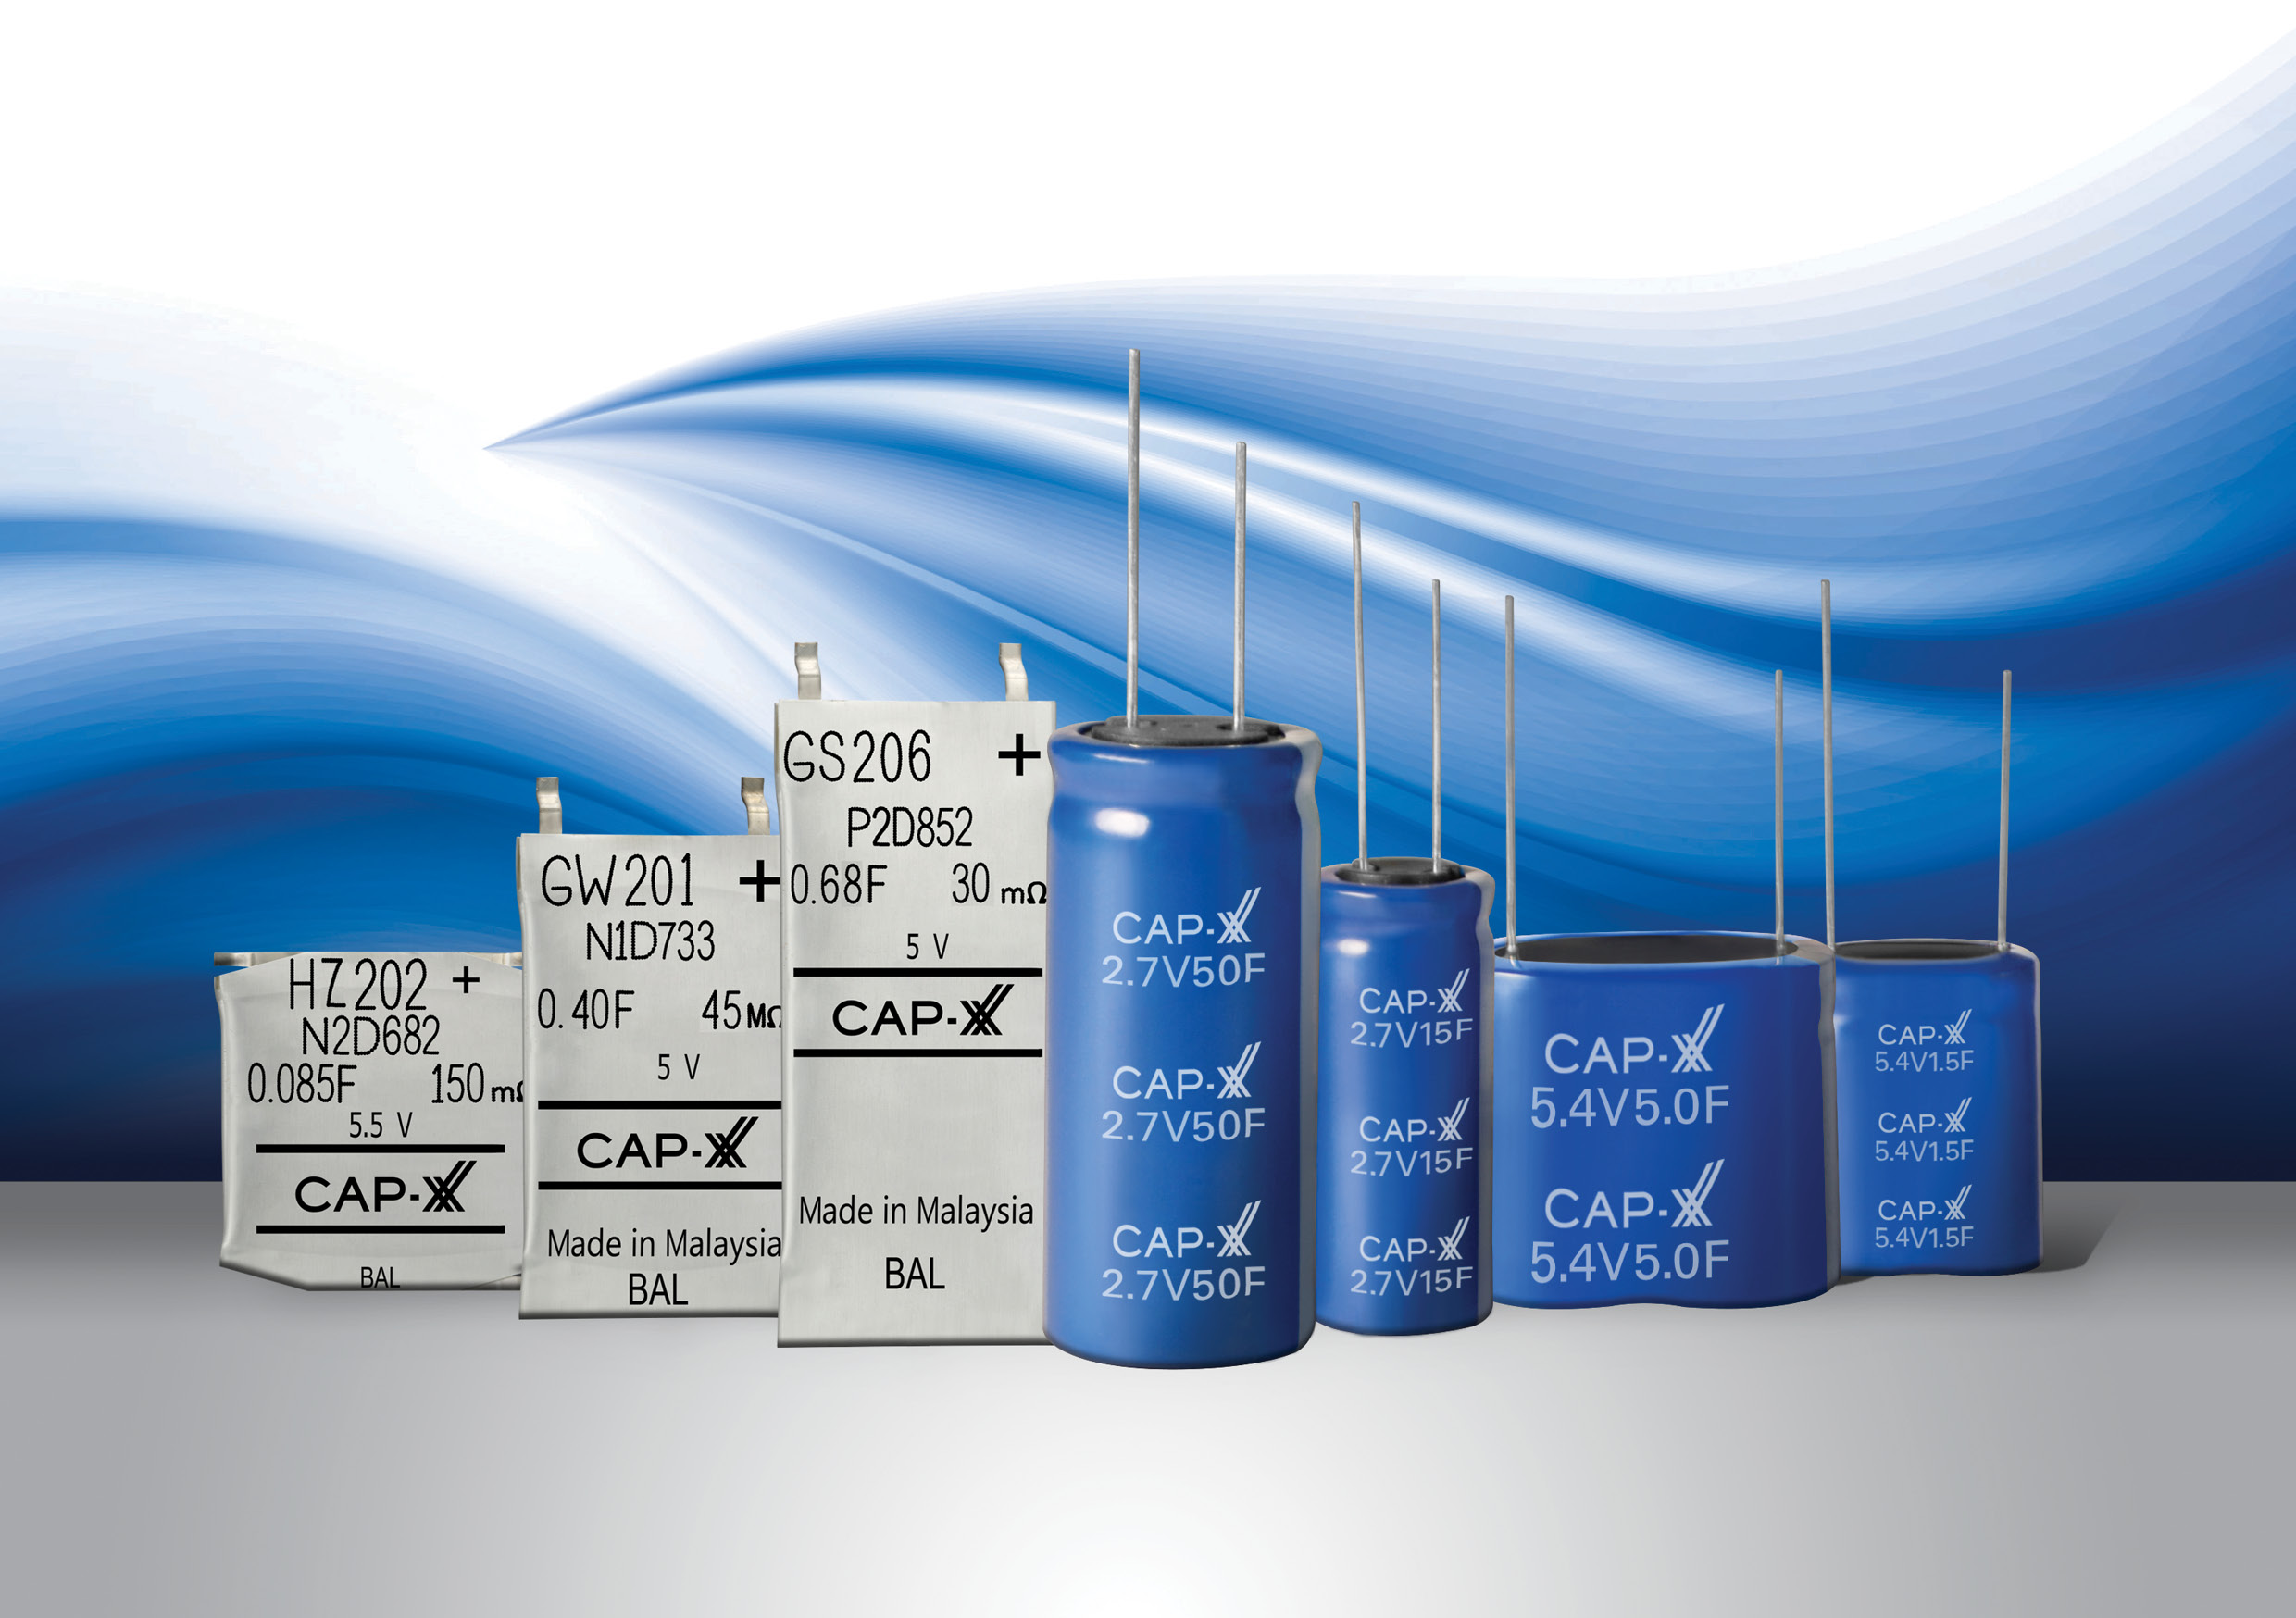 Adding low-cost compact cylindrical supercapacitors to its existing thin prismatics, CAP-XX offers a wide range of small supercapacitors to power IoT industrial/consumer devices.  1-400F, 2.7V / 5.4V.